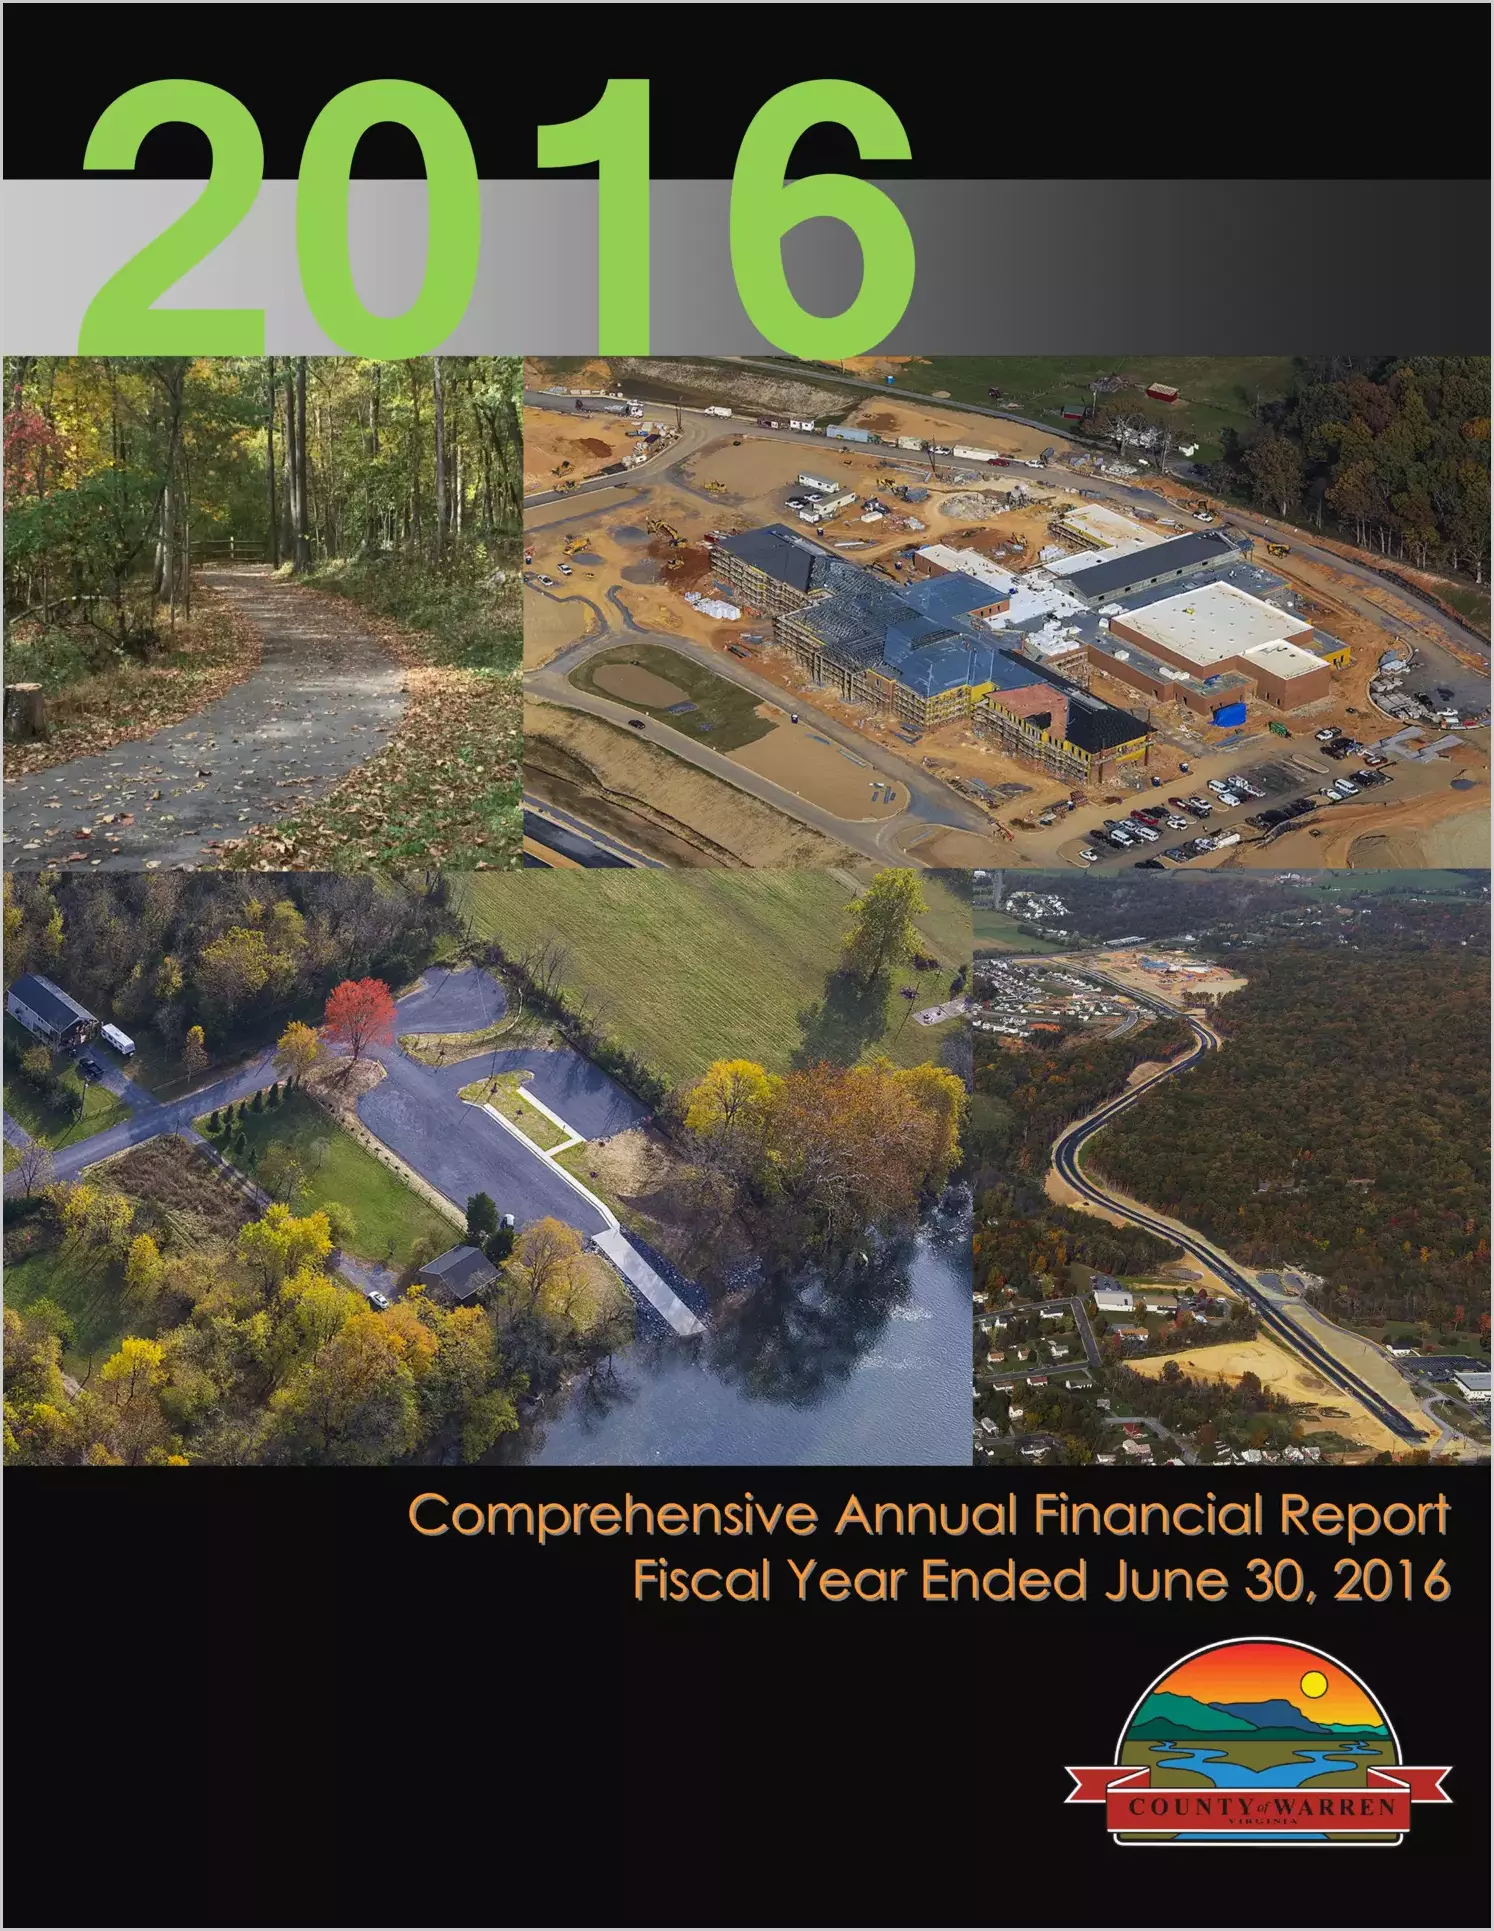 2016 Annual Financial Report for County of Warren